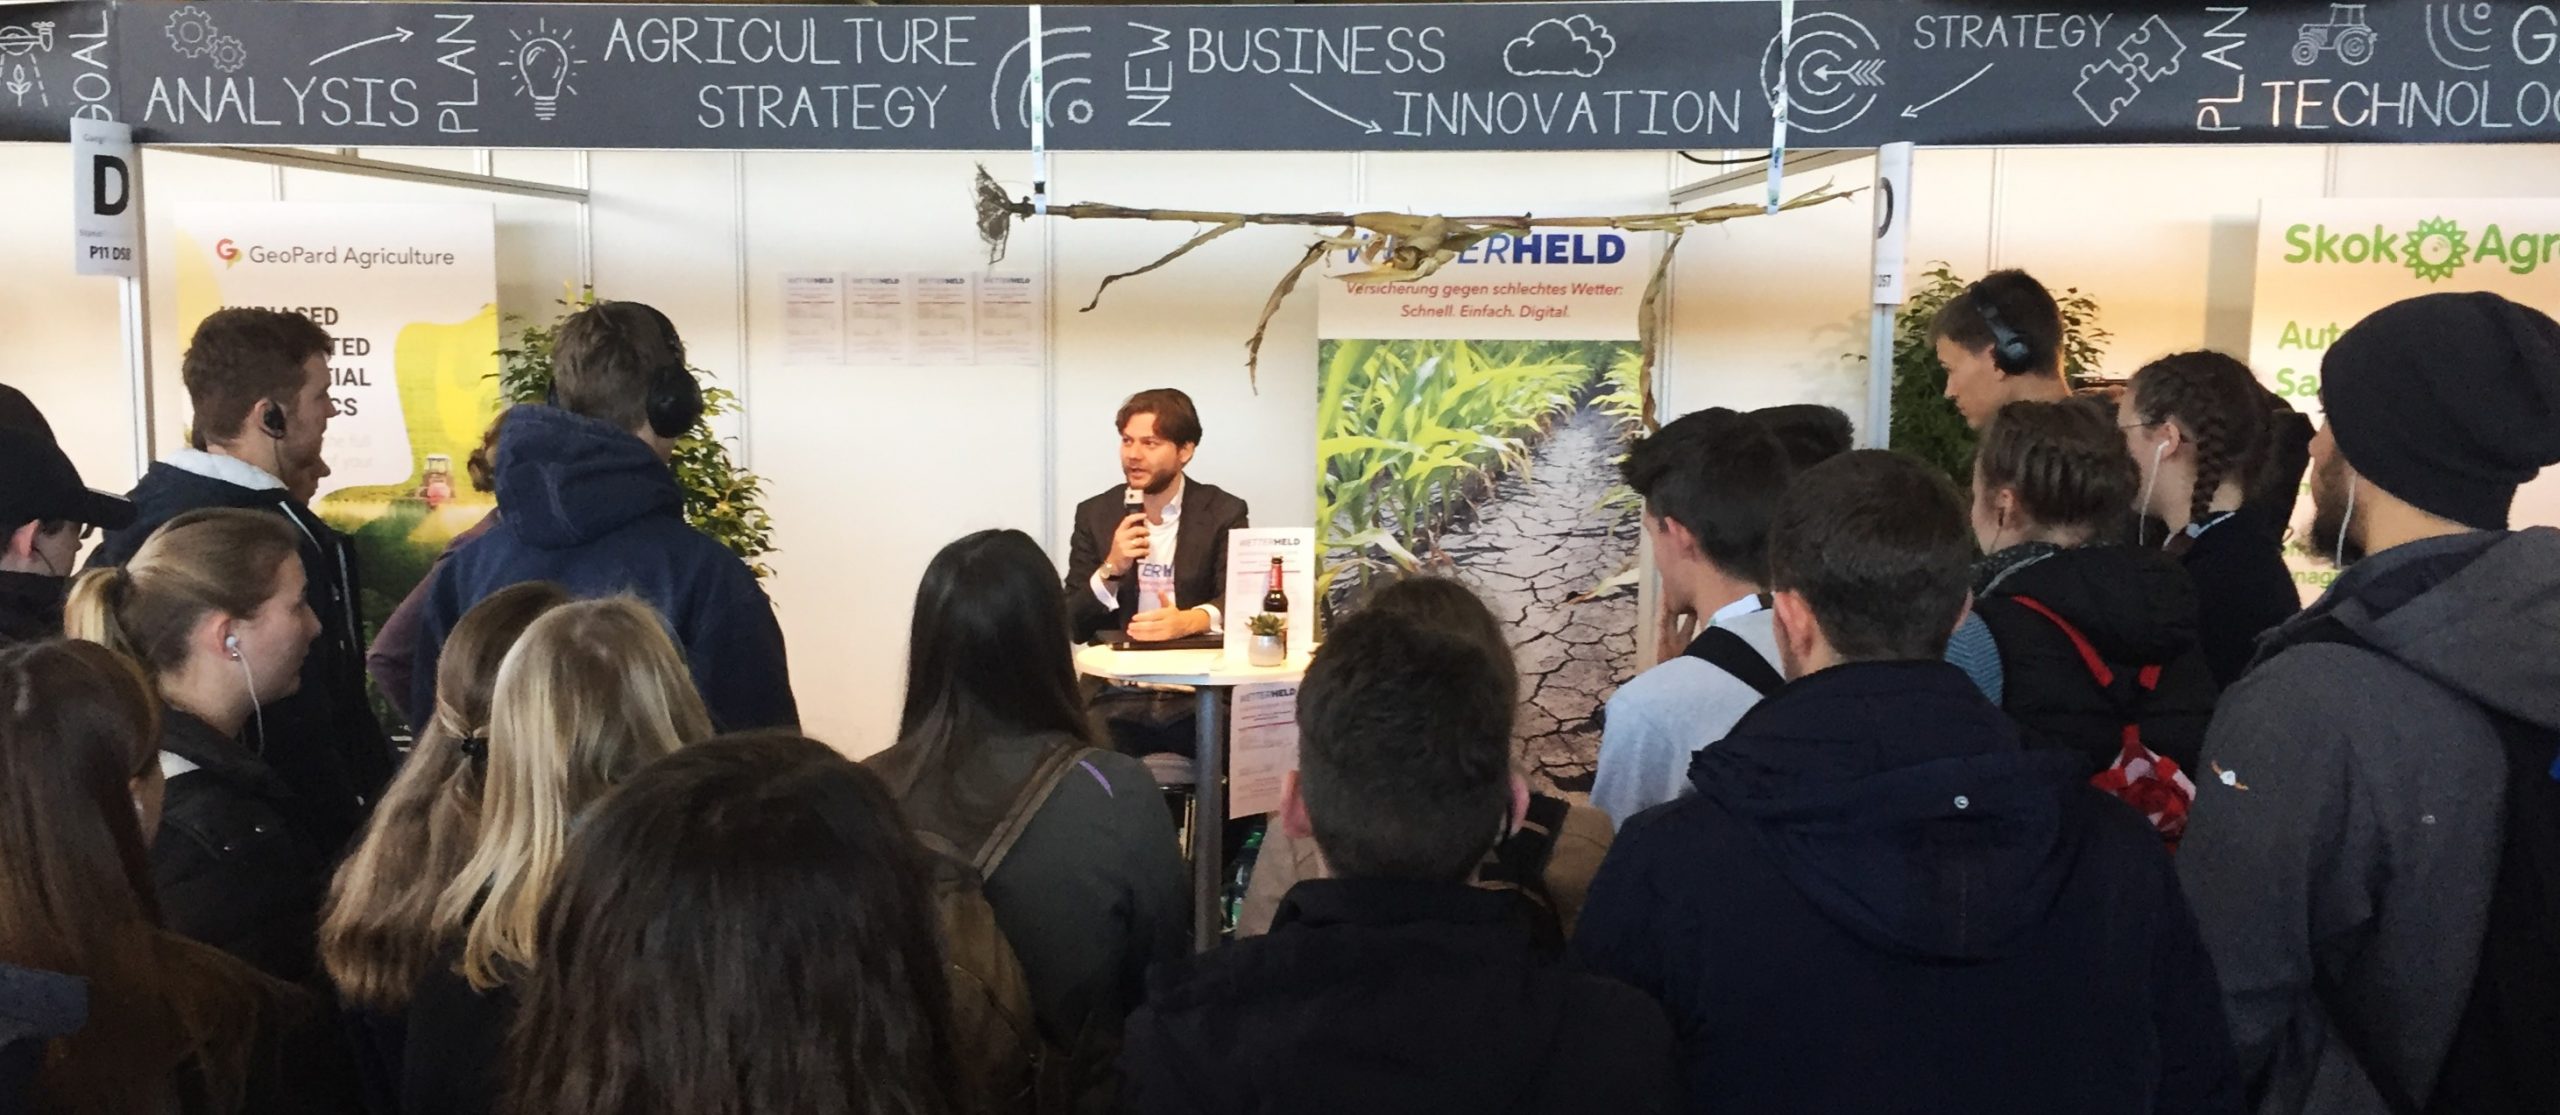 Drought insurance by Wetterheld, explained to Agritechnica visitors by our CEO Nikolaus Haufler